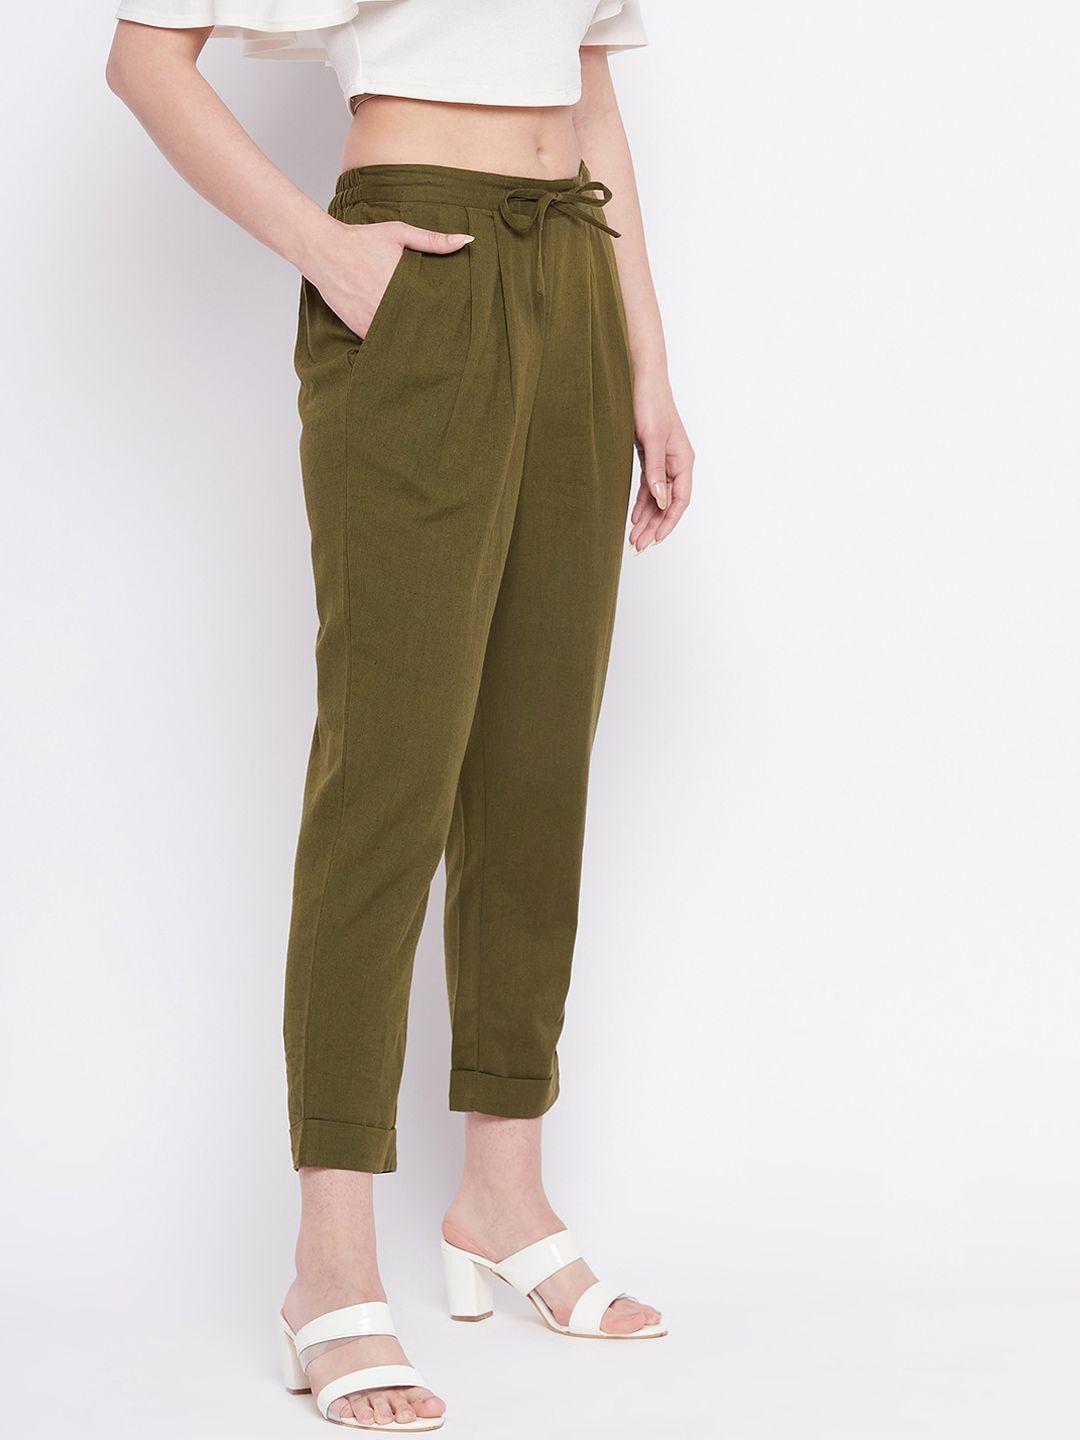 winered-women-olive-green-pleated-cotton-trousers